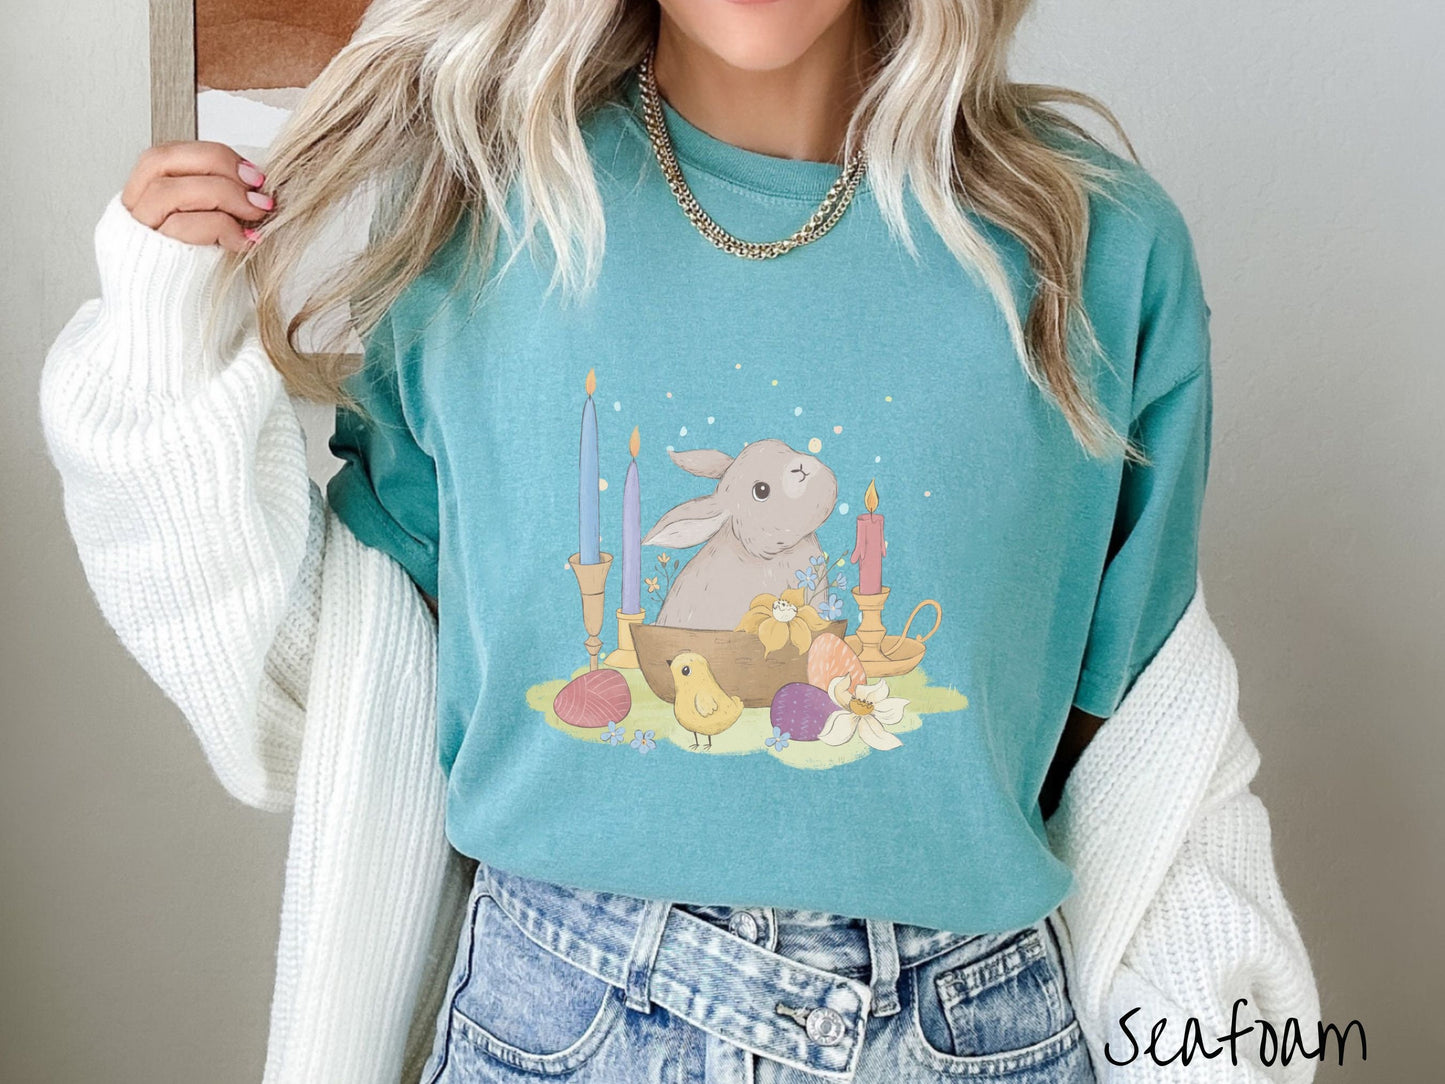 A woman wearing a cute, vintage seafoam colored shirt with a gray bunny rabbit sitting in between three lit candles, some red, orange, and purple eggs, and yellow and white flowers.